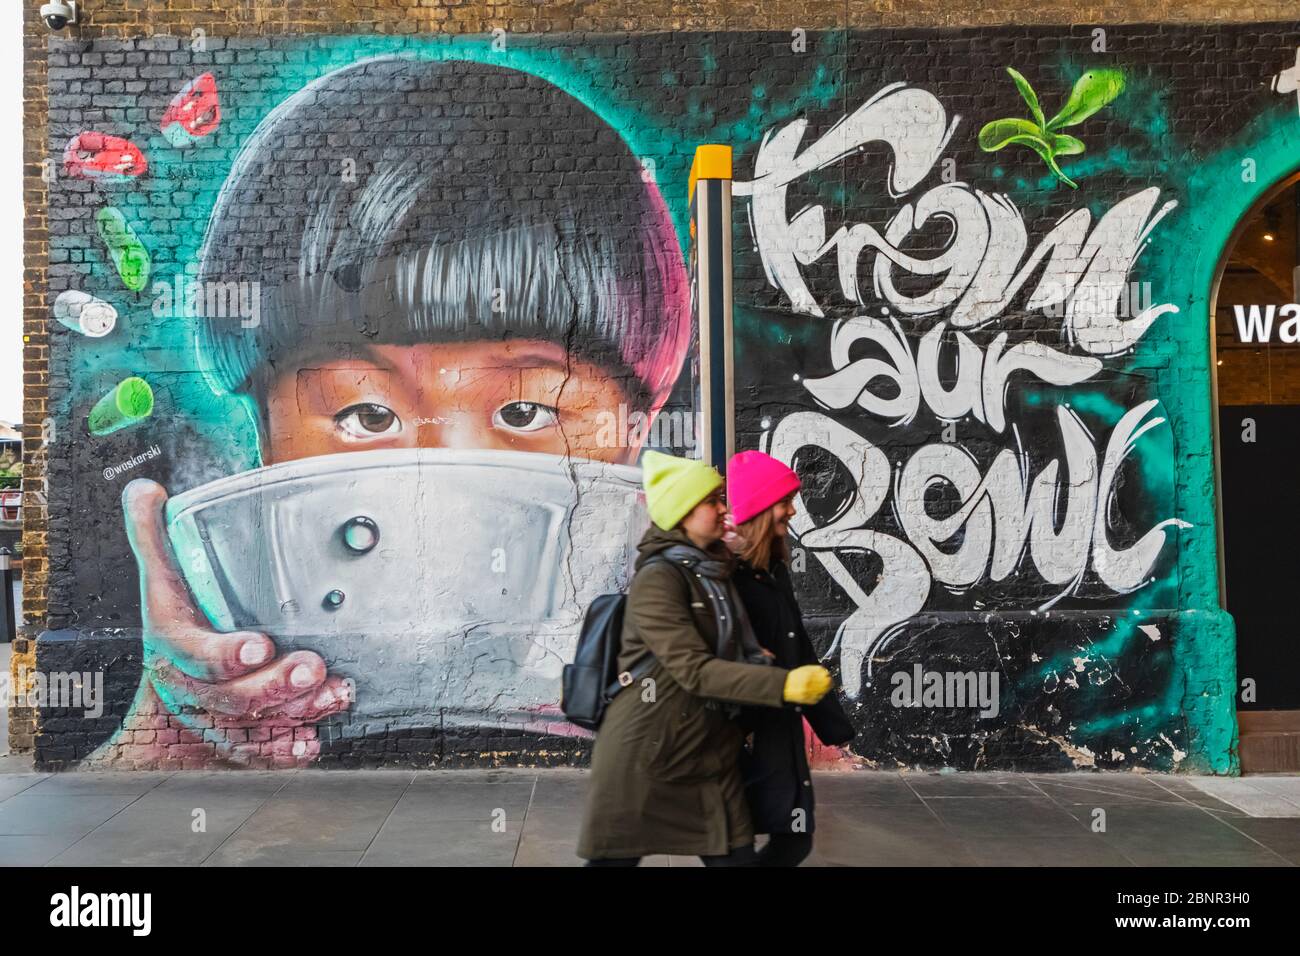 England, London, Southwark, Clink Street, Two Girls Walking Past Wall Mural Street Art depicting Asian Child Eating from Bowl Stock Photo